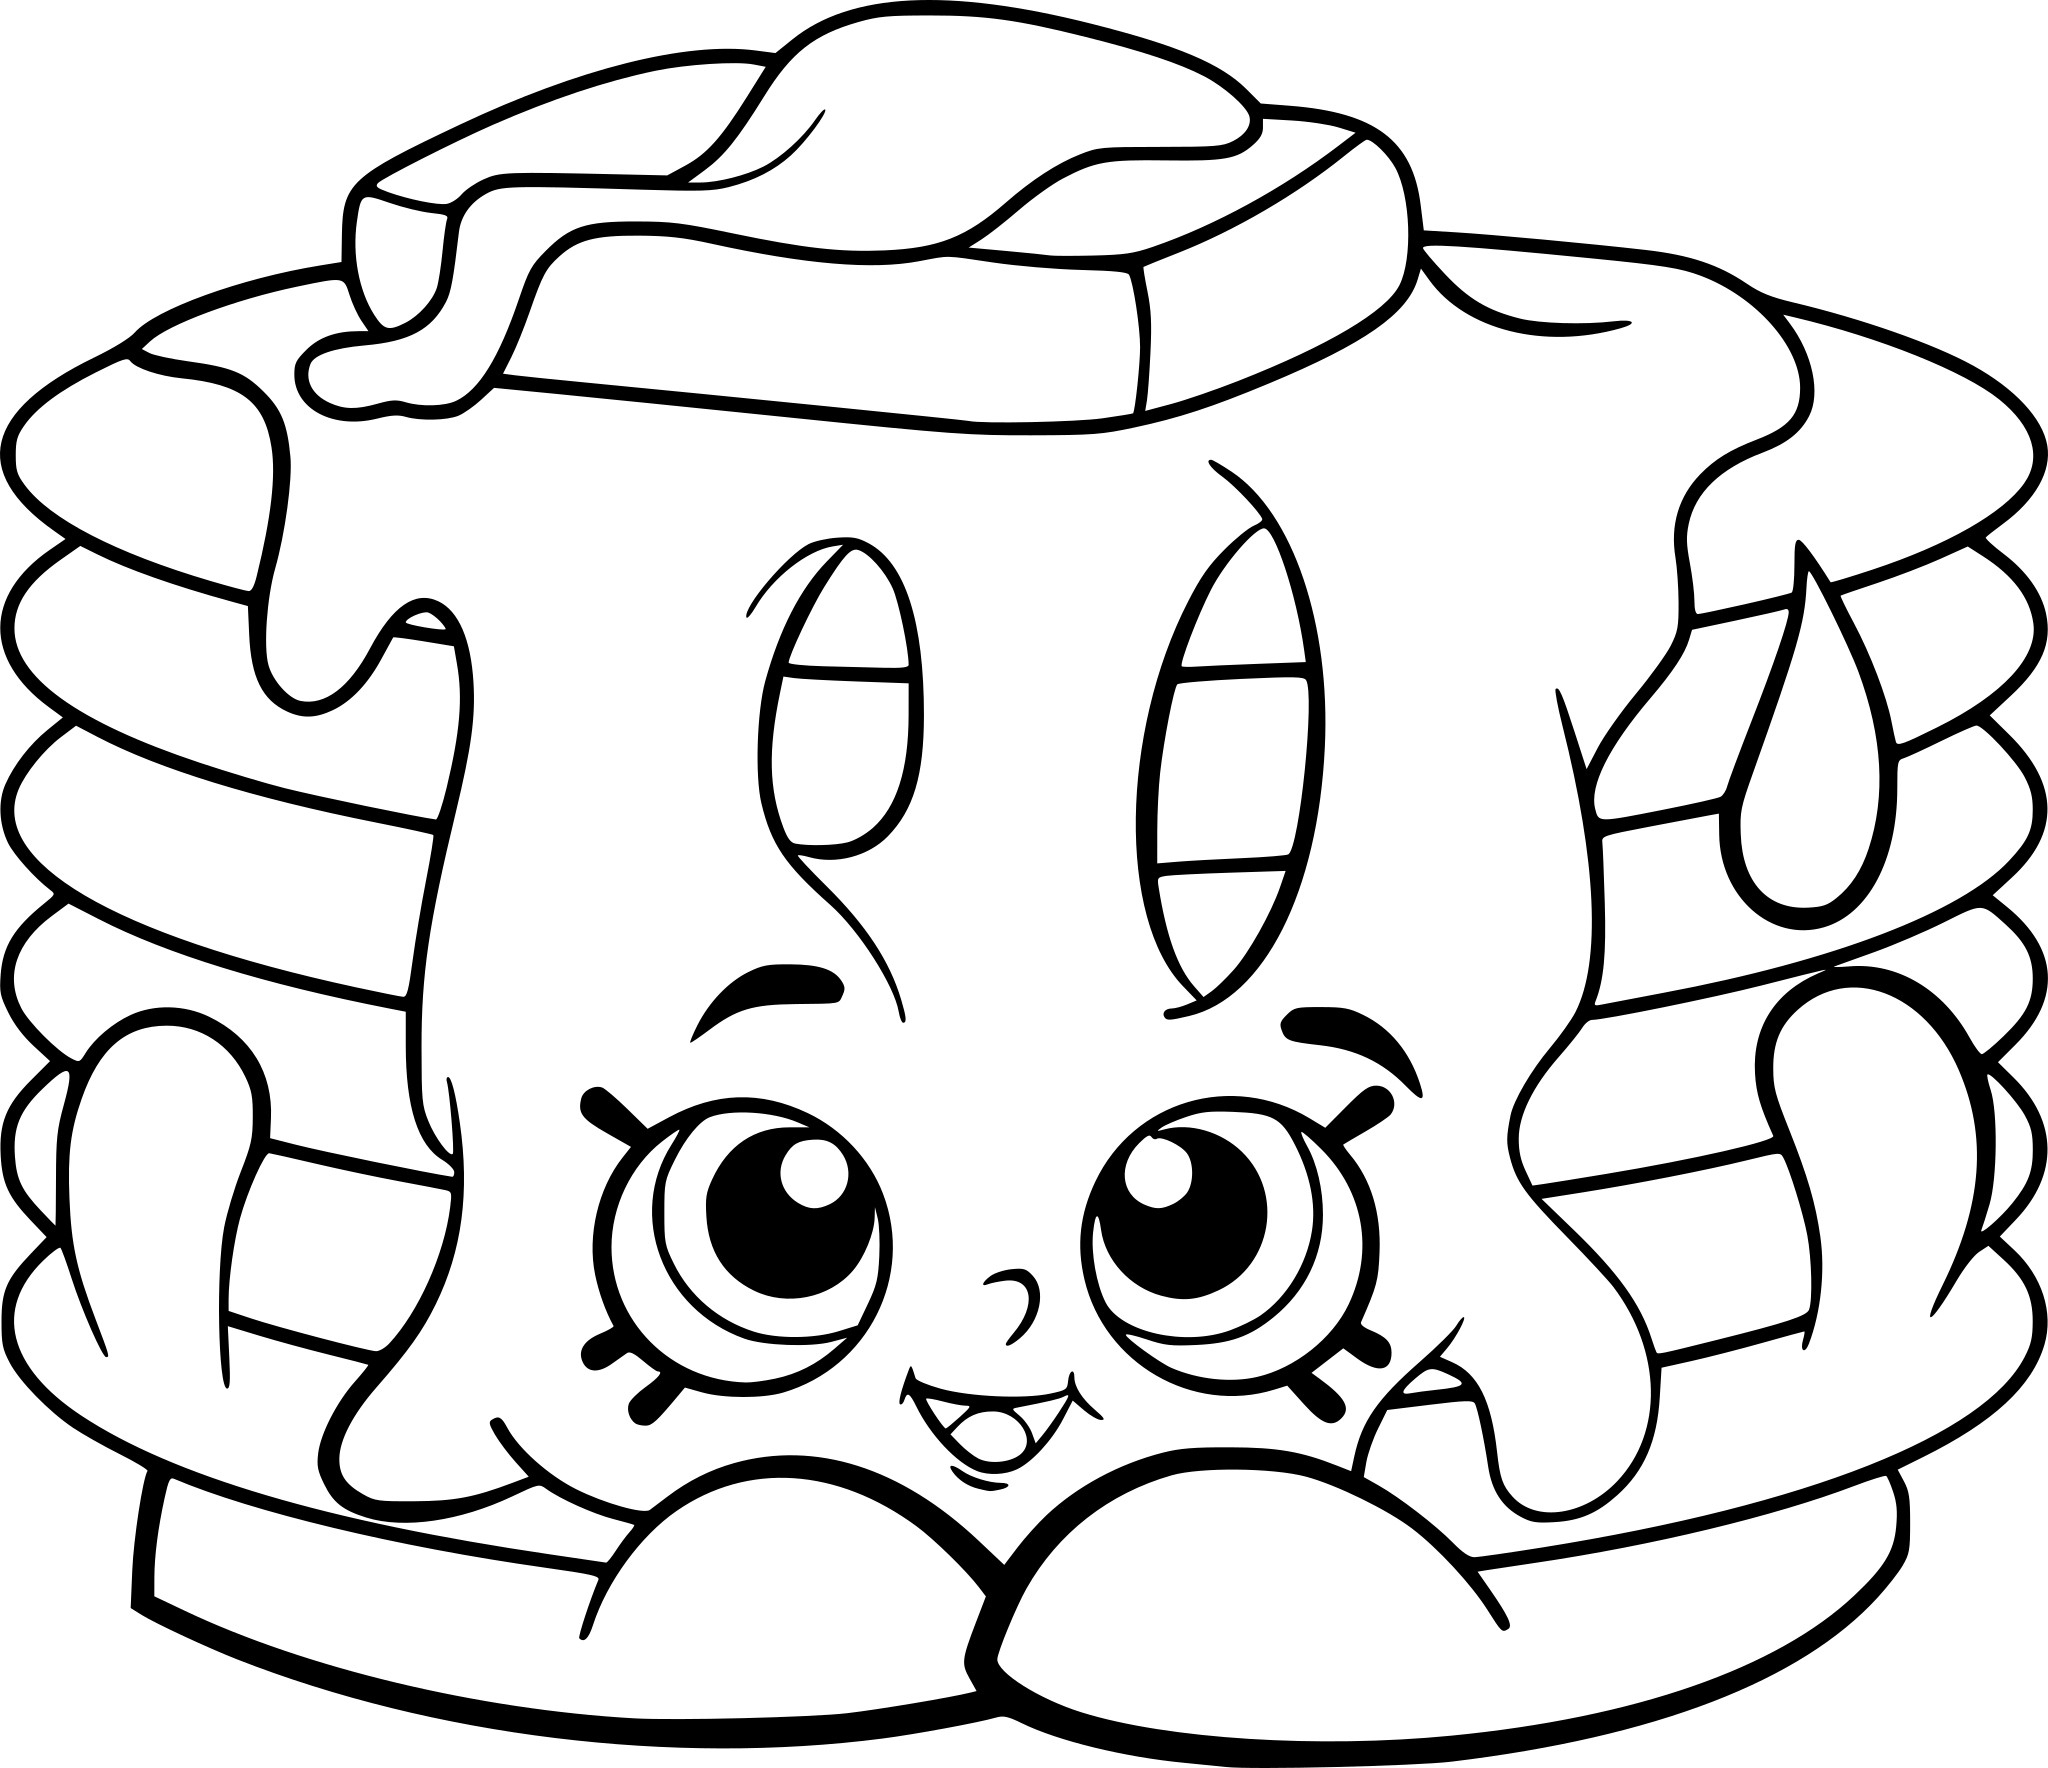 Free Printable Shopkins Coloring Pages - Coloring Pages For Kids - Shopkins Coloring Pages Free Printable